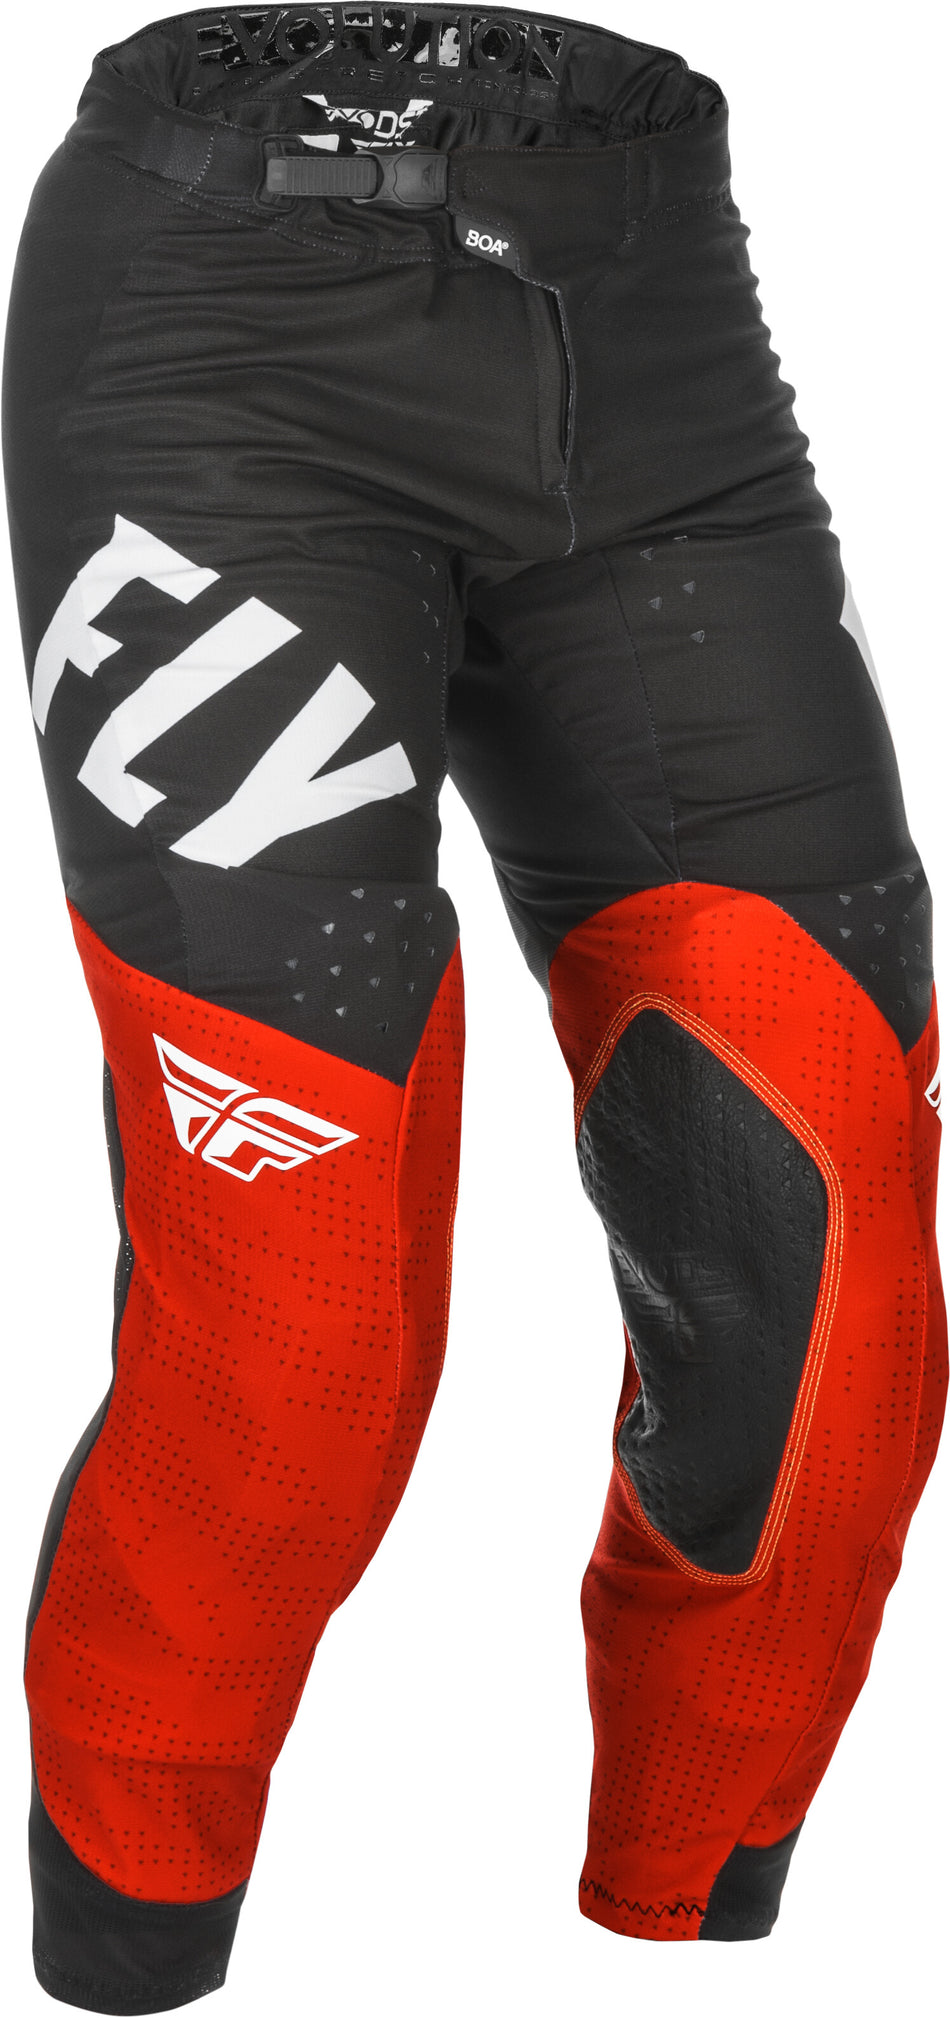 FLY RACING Evolution Dst Pants Red/Black/White Sz 36 374-13236